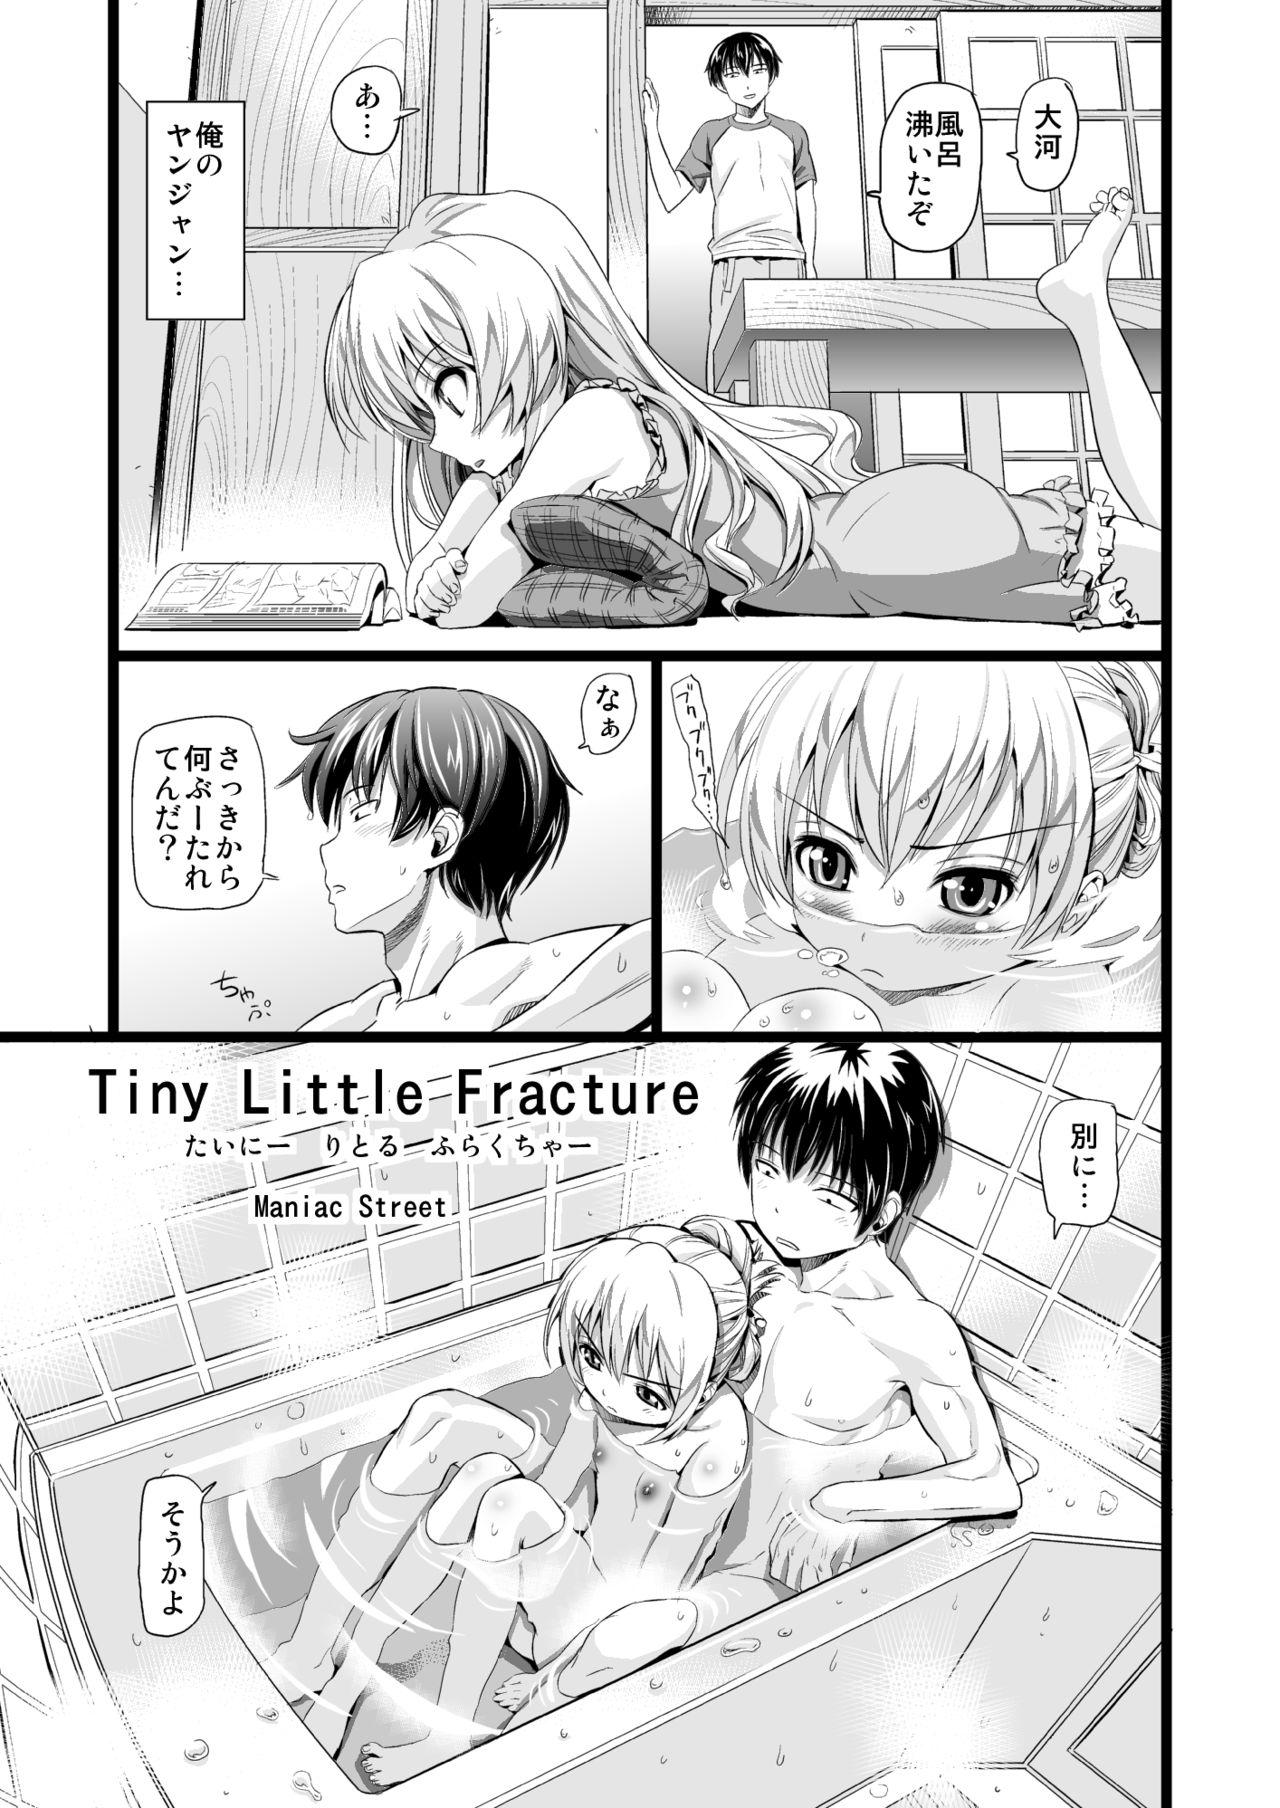 Online Tiny Little Fracture - Toradora Amature Sex Tapes - Page 2